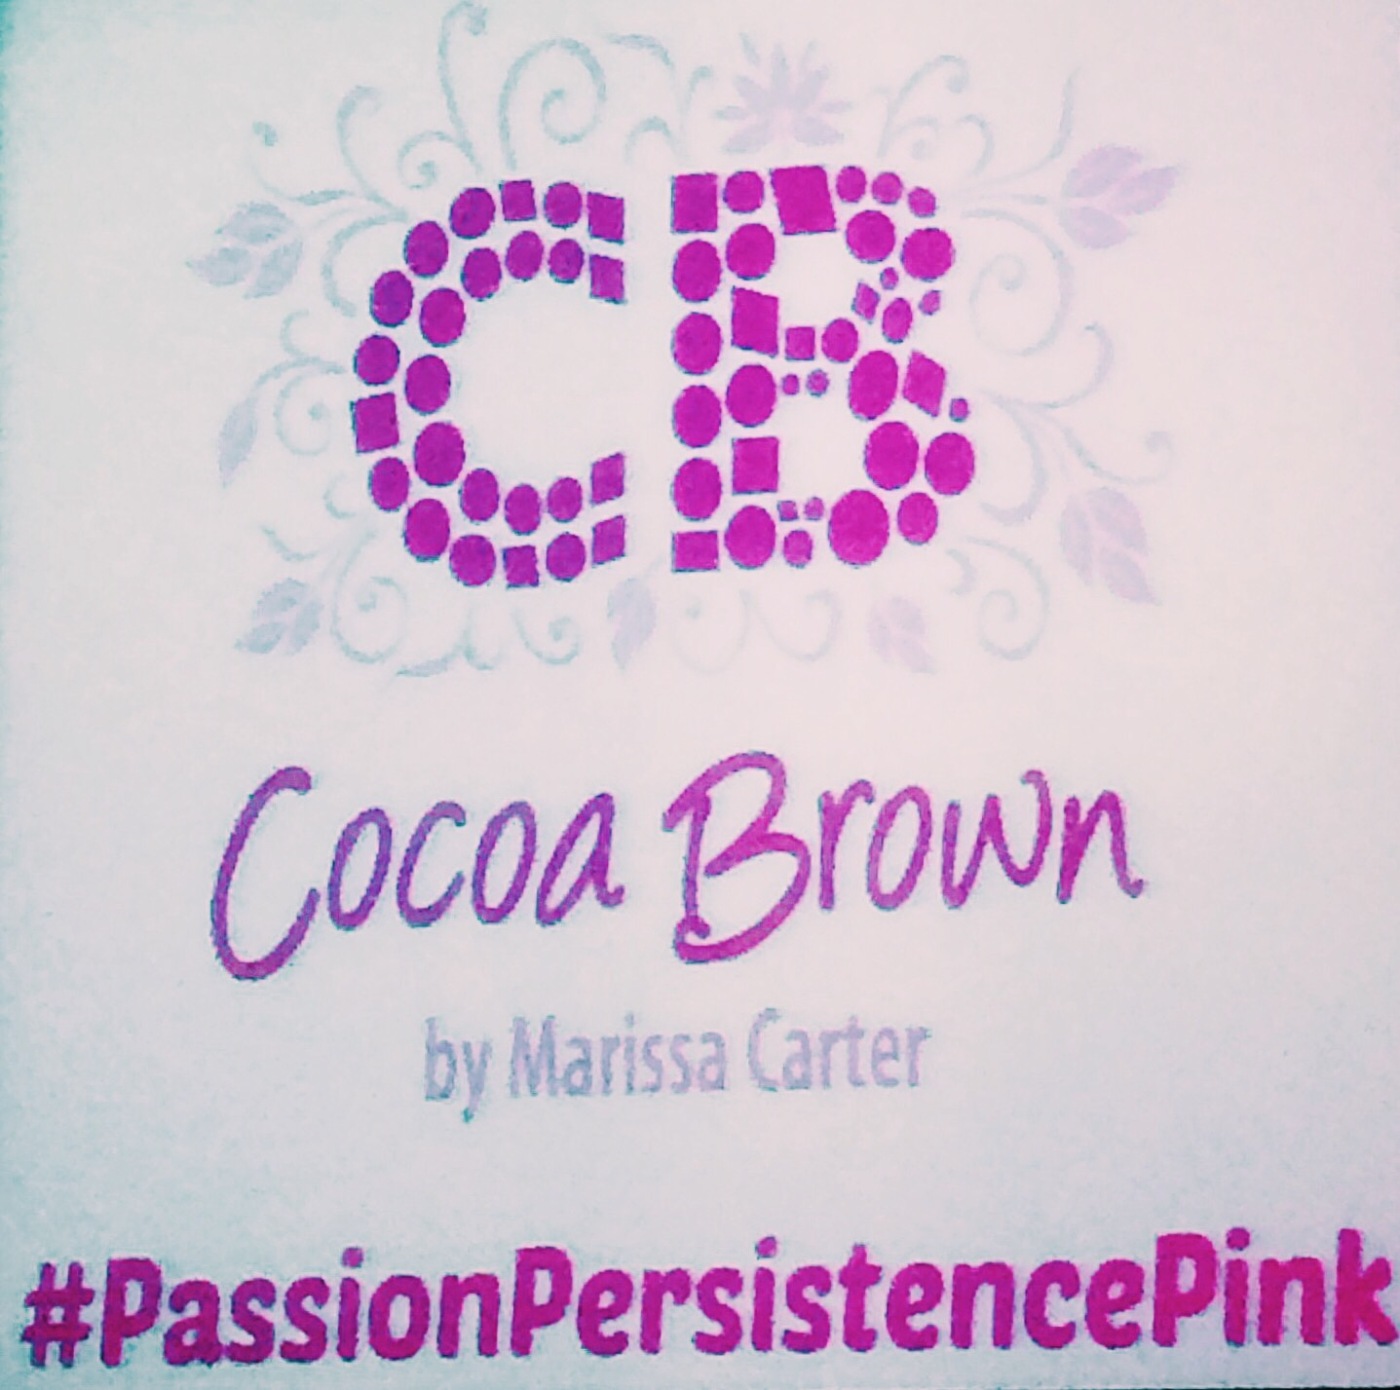 Cocoa Brown Passion Persistence Pink - Product Launch